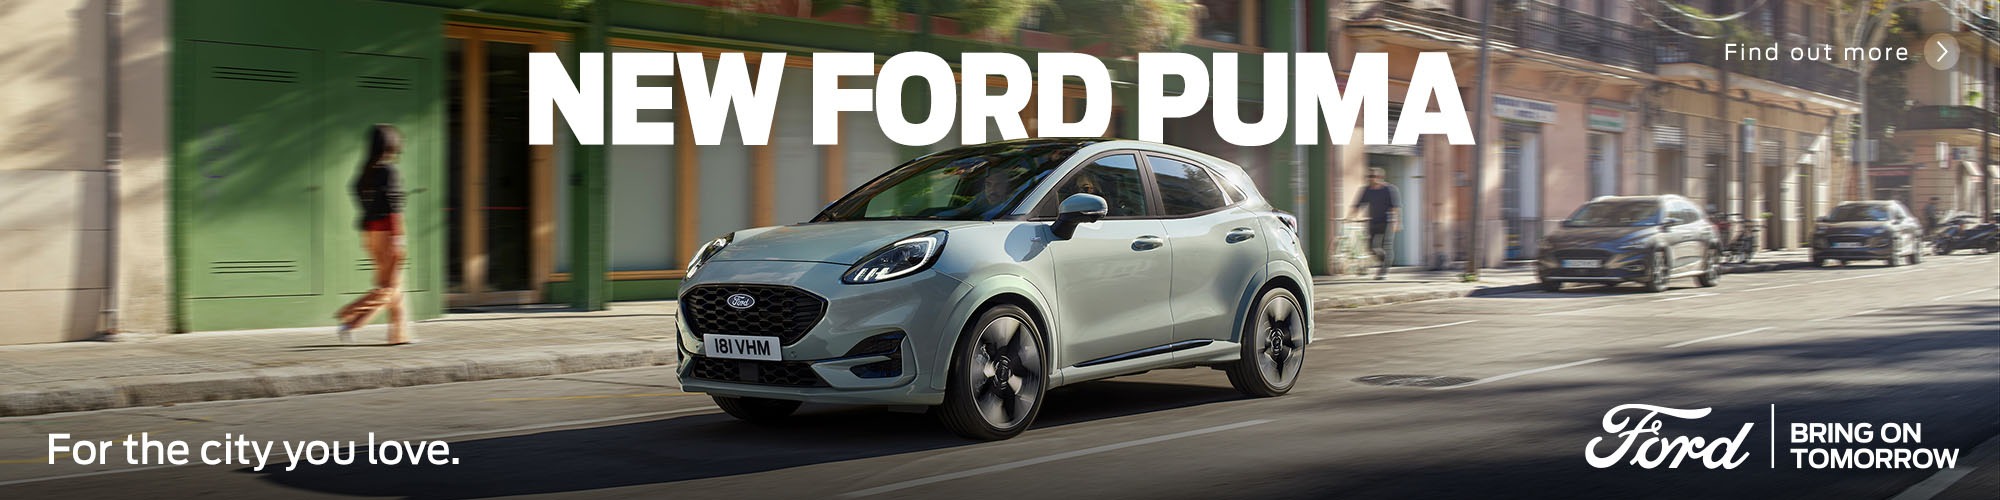 ford new-puma Banner